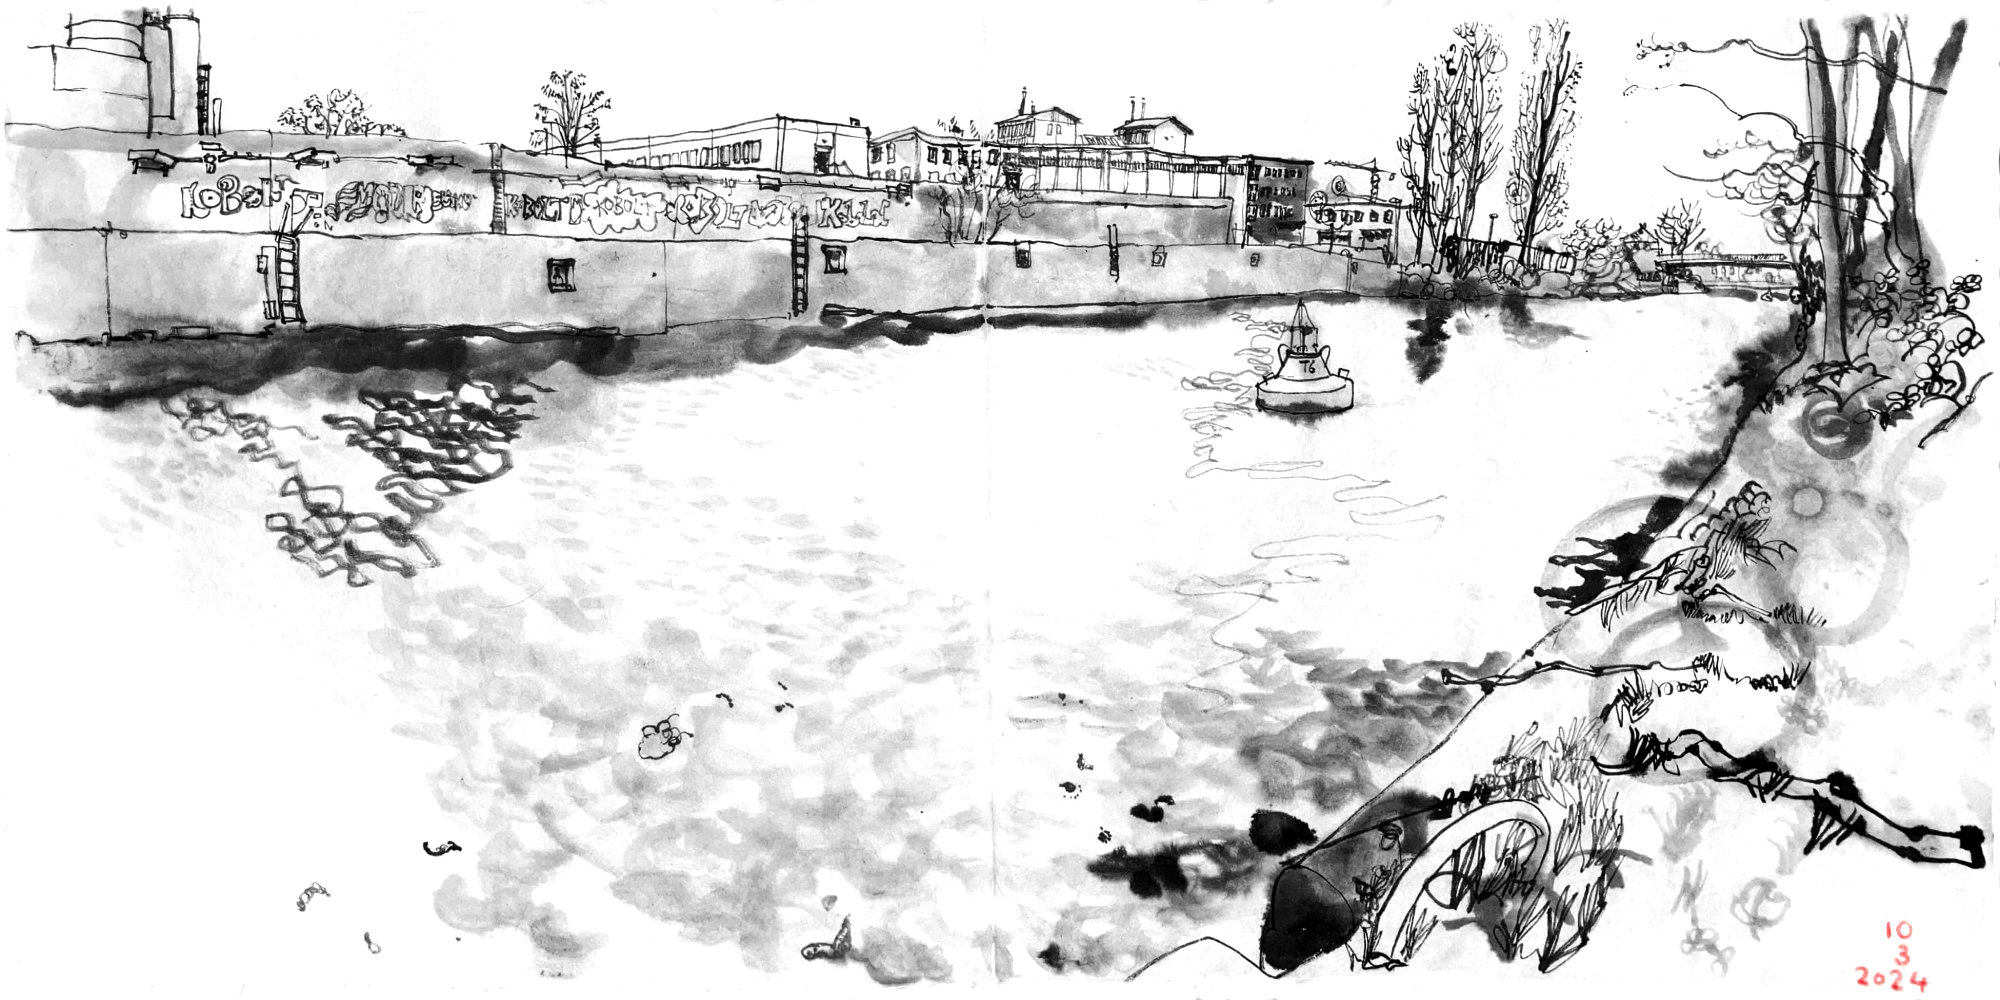 Ink drawing of a canal,  on the opposite bank is a concrete wall an industrial buildings, in the back right aa bridge, on this bank, in the right of the imagee are trees and grass.